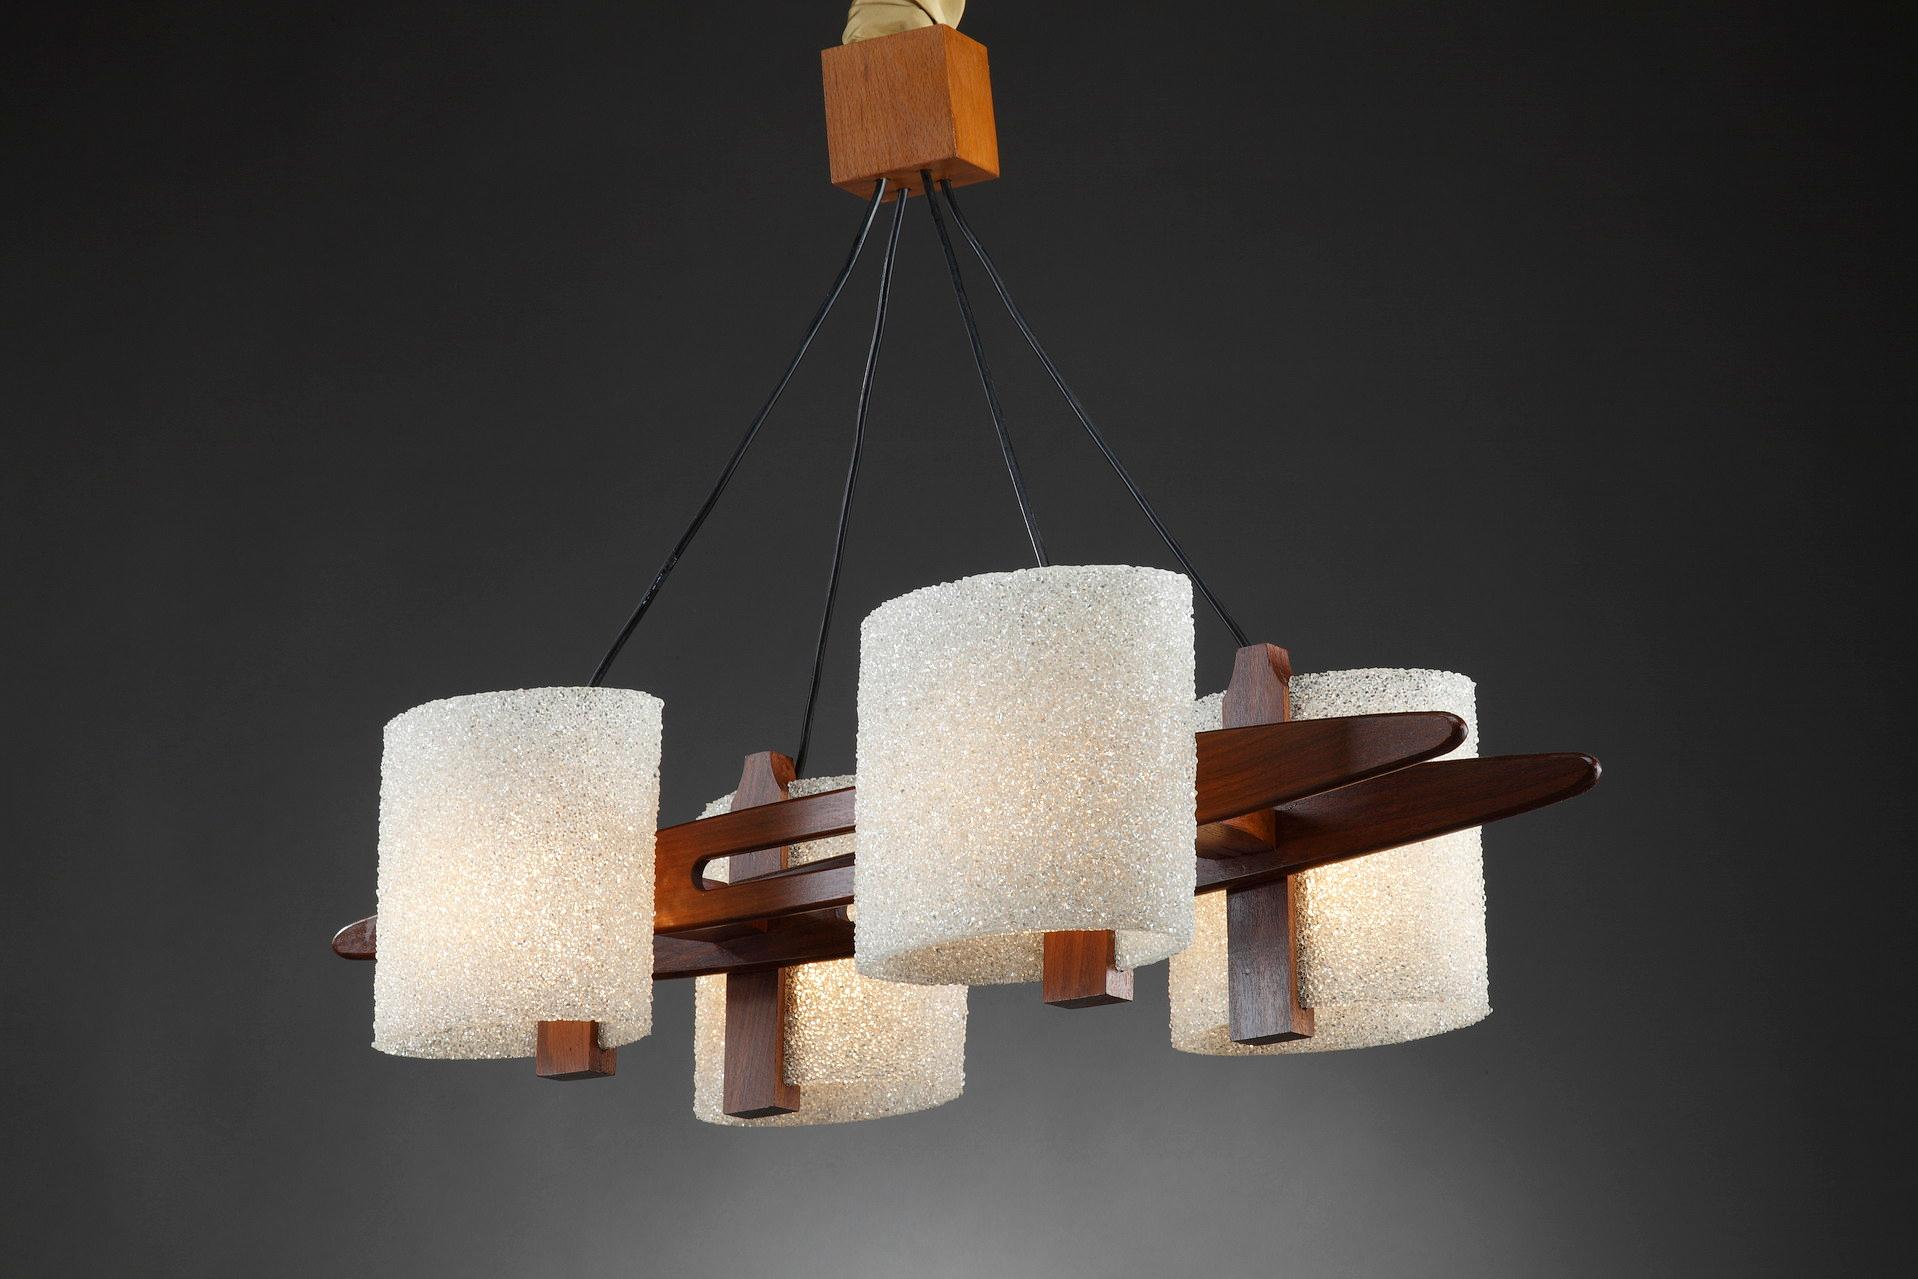 Scandinavian style hanging lamp in teak and exotic wood with granite perspex lampshades. It is suspended by four black wires and is attached to the ceiling by a teak cube. This four light chandelier is typical of the Scandinavian design of the